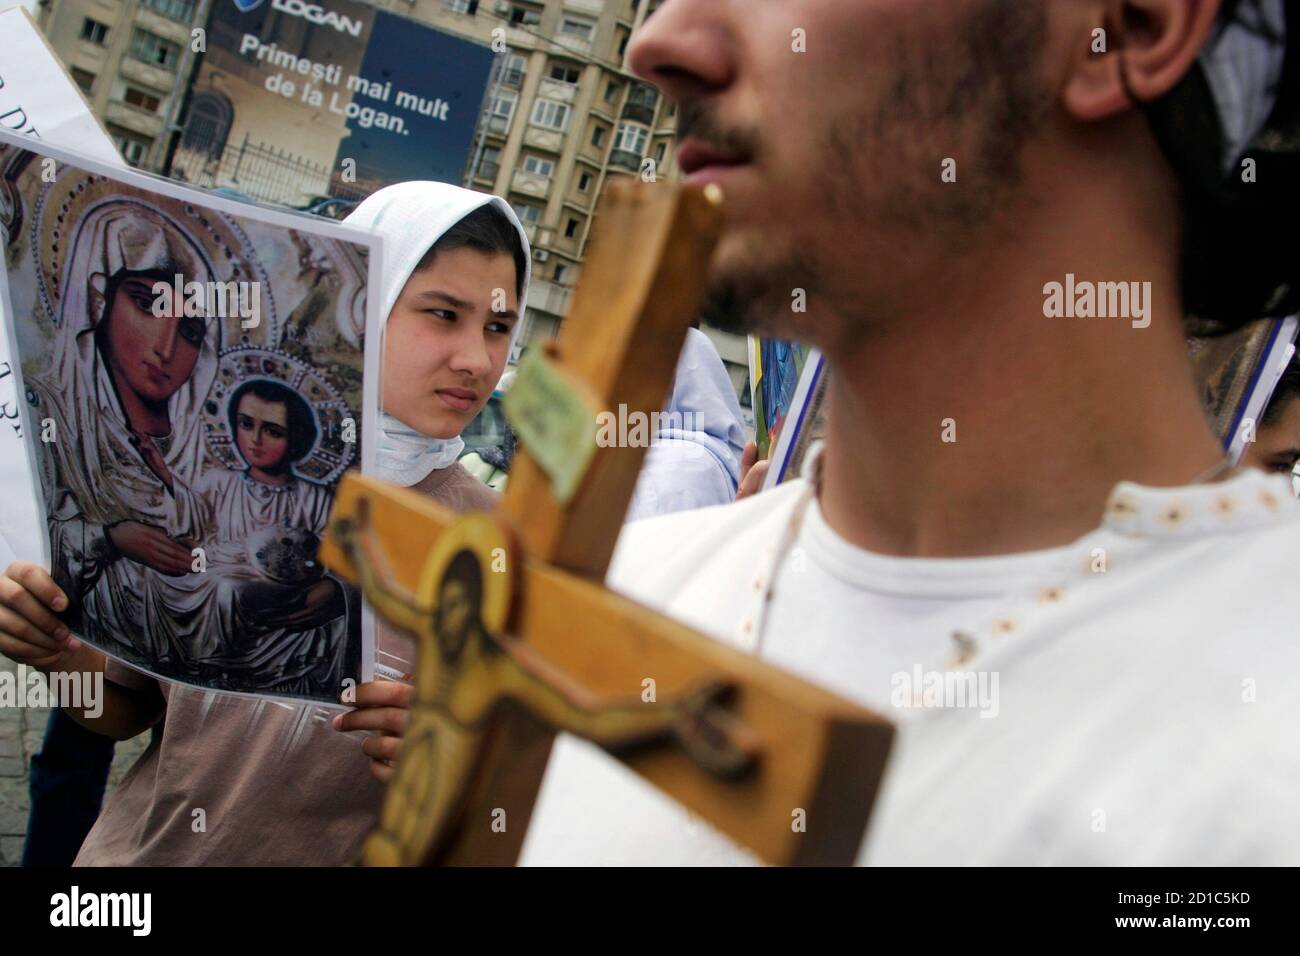 Protestors hold Orthodox icons and crosses during a march against a scheduled gay parade through the capital, in Bucharest June 9, 2007.   REUTERS/Mihai Barbu (ROMANIA) Stock Photo